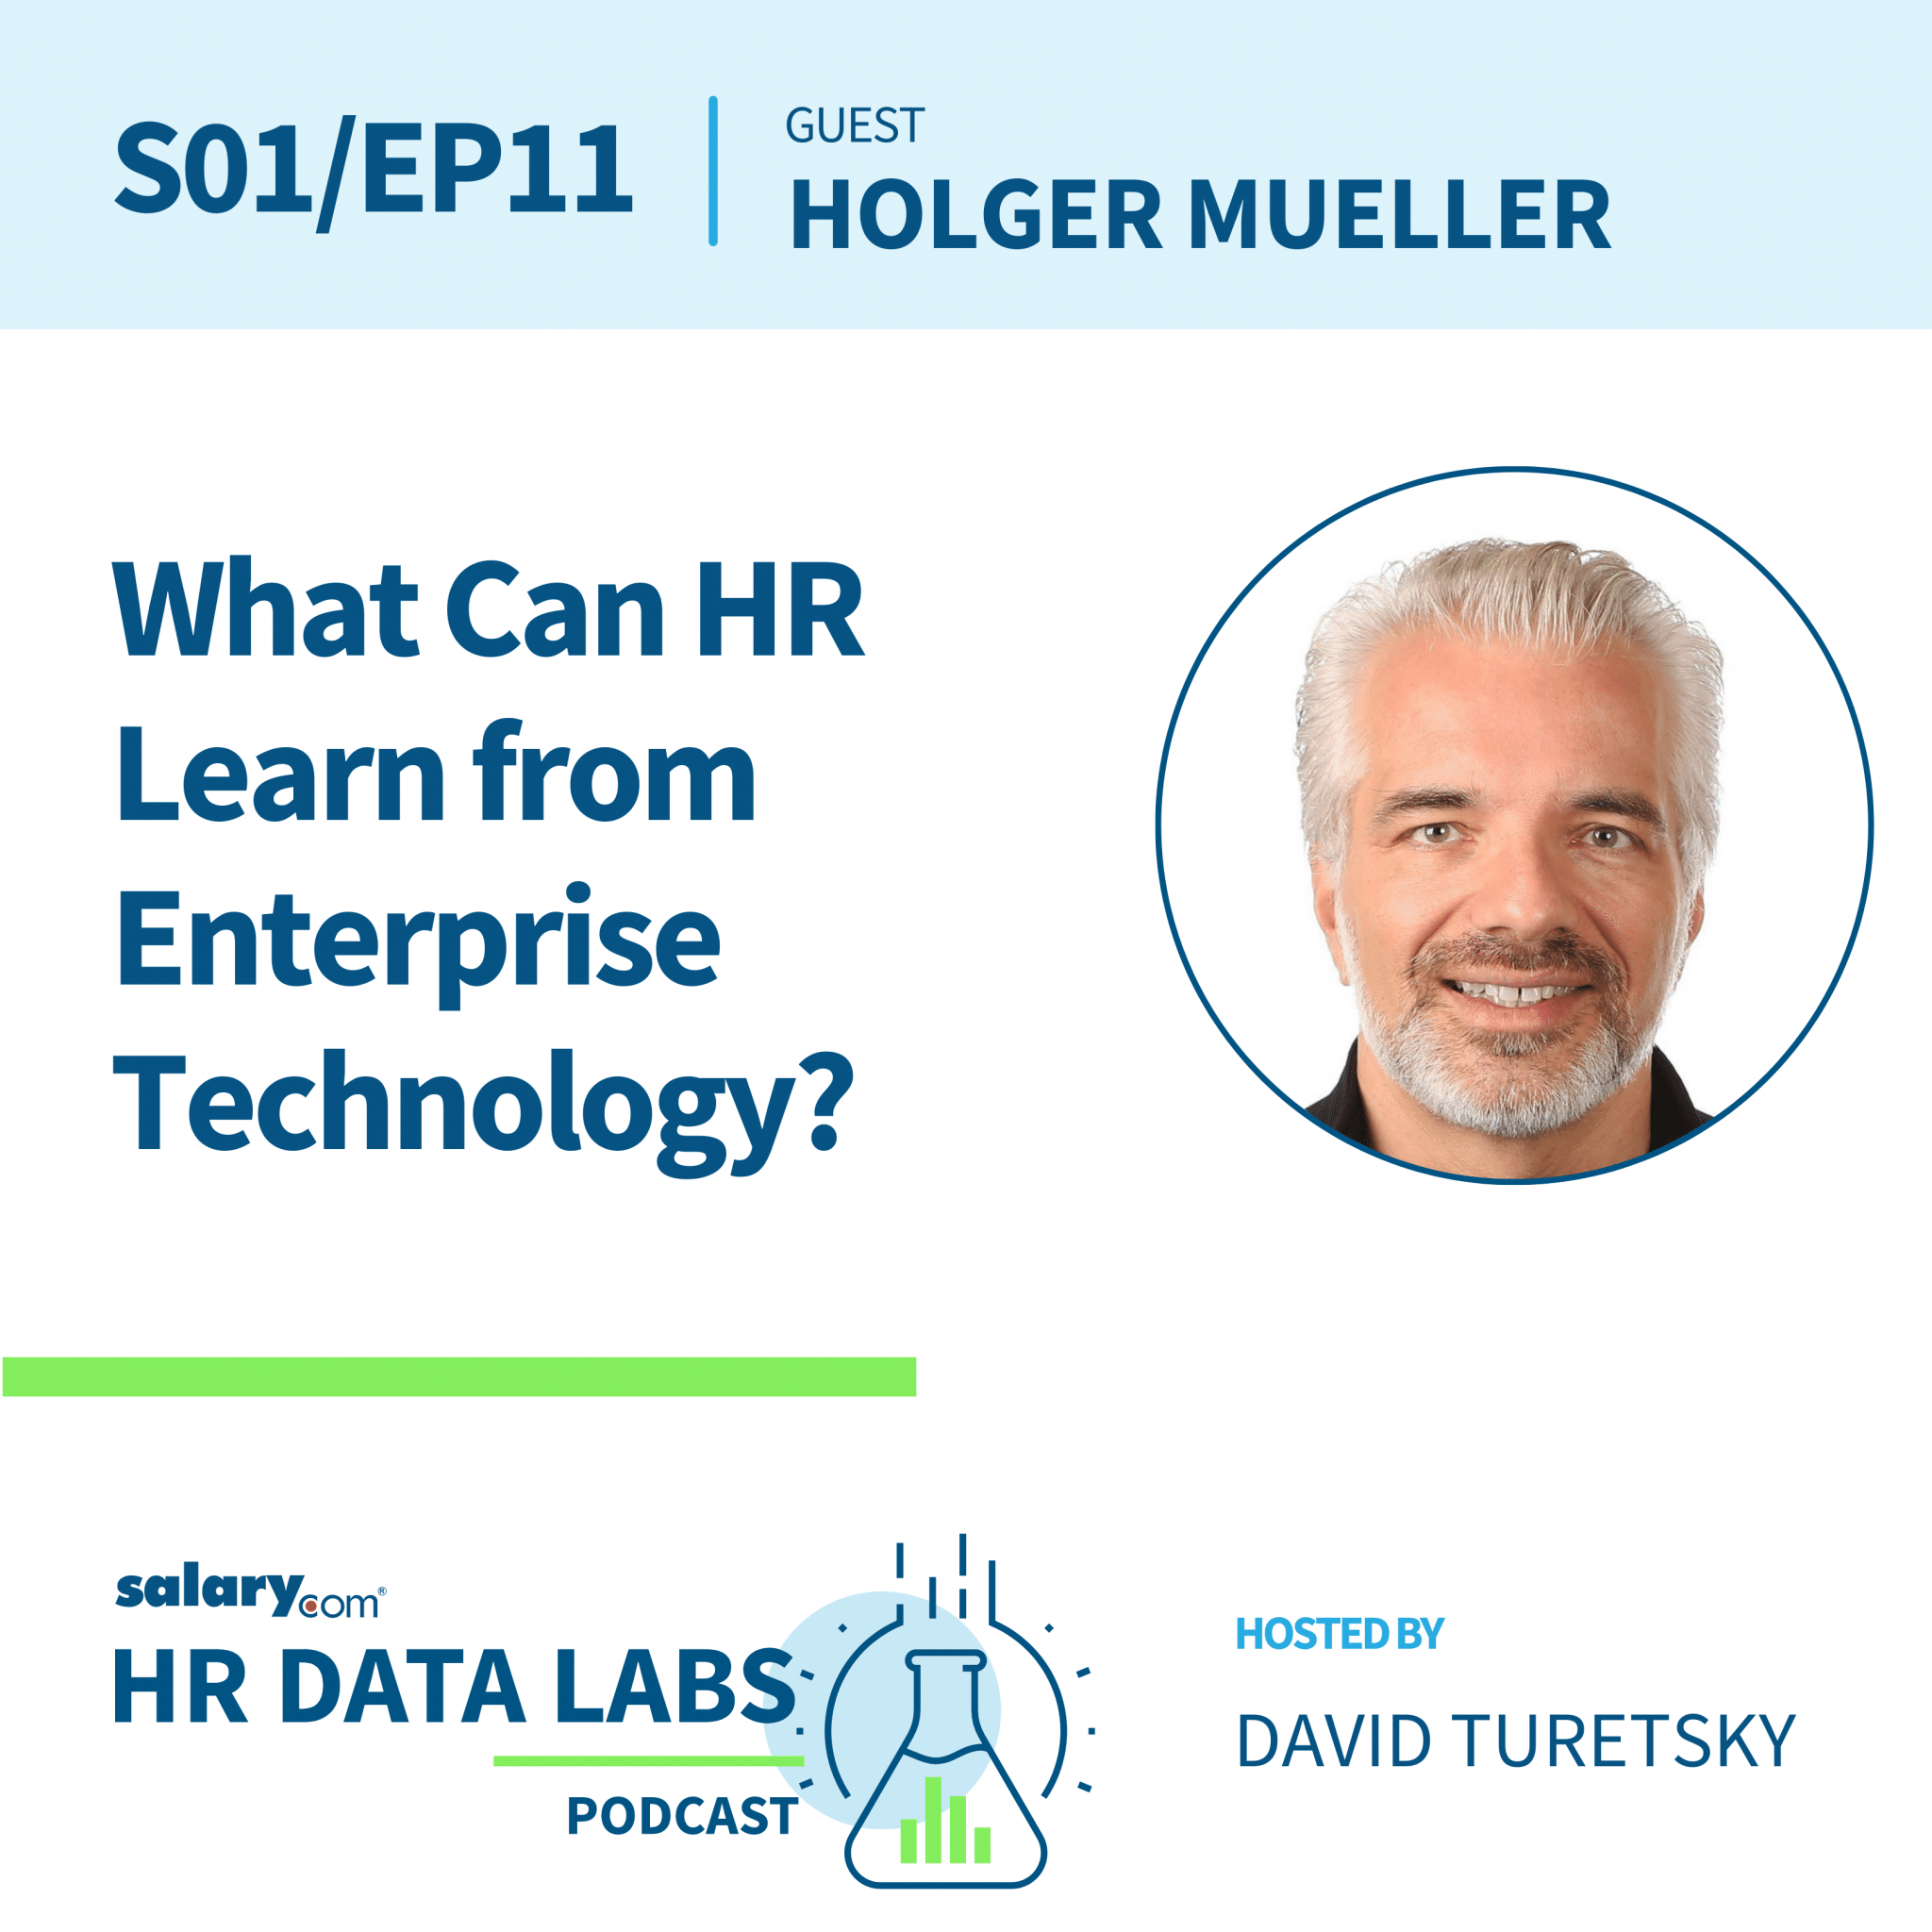 What can HR learn from Enterprise Technology?